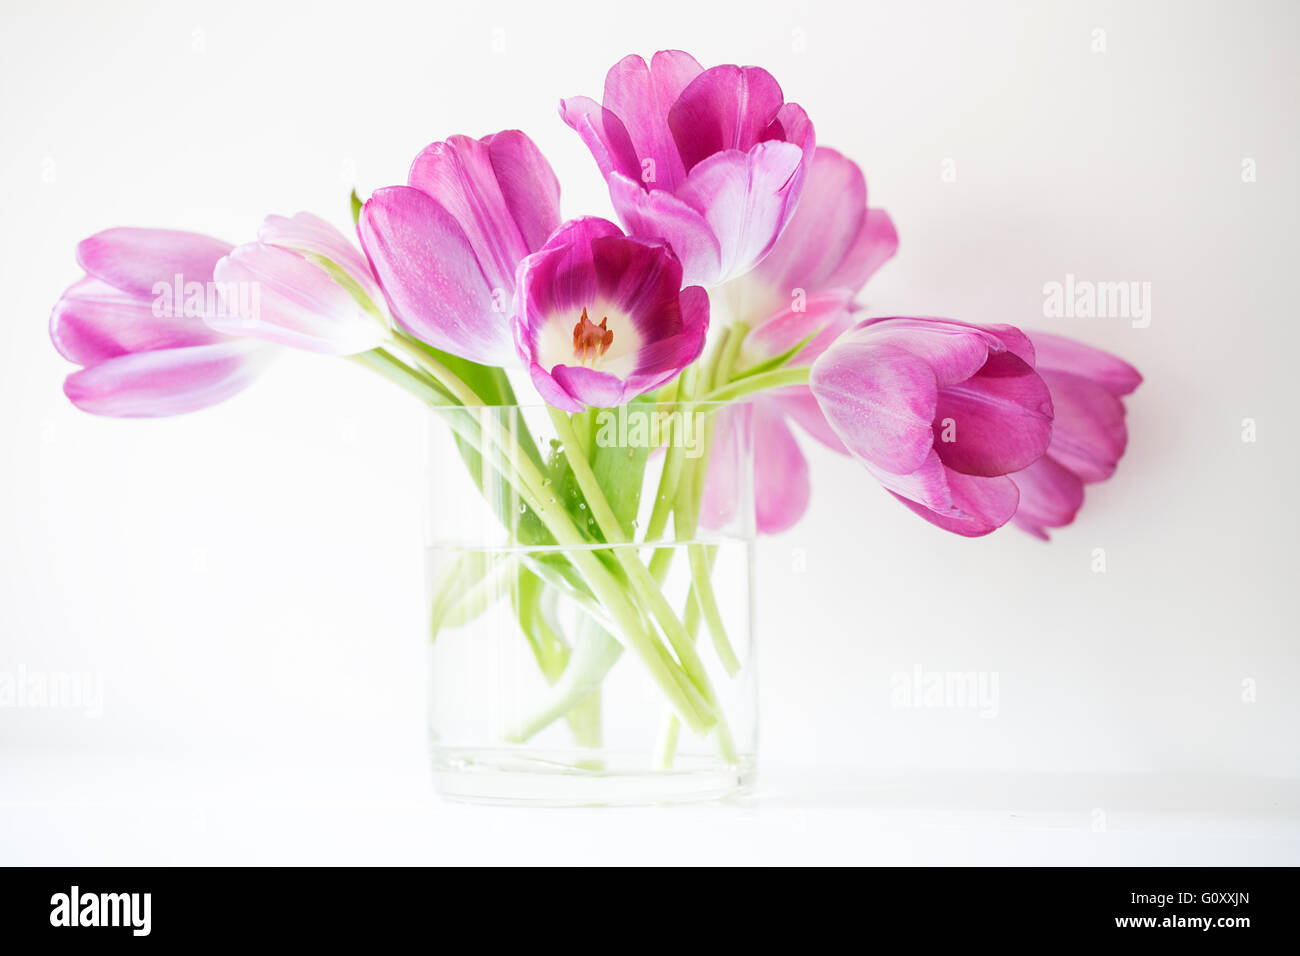 An arrangement of vibrant, pink tulips in a glass vase, set against a white background. Stock Photo